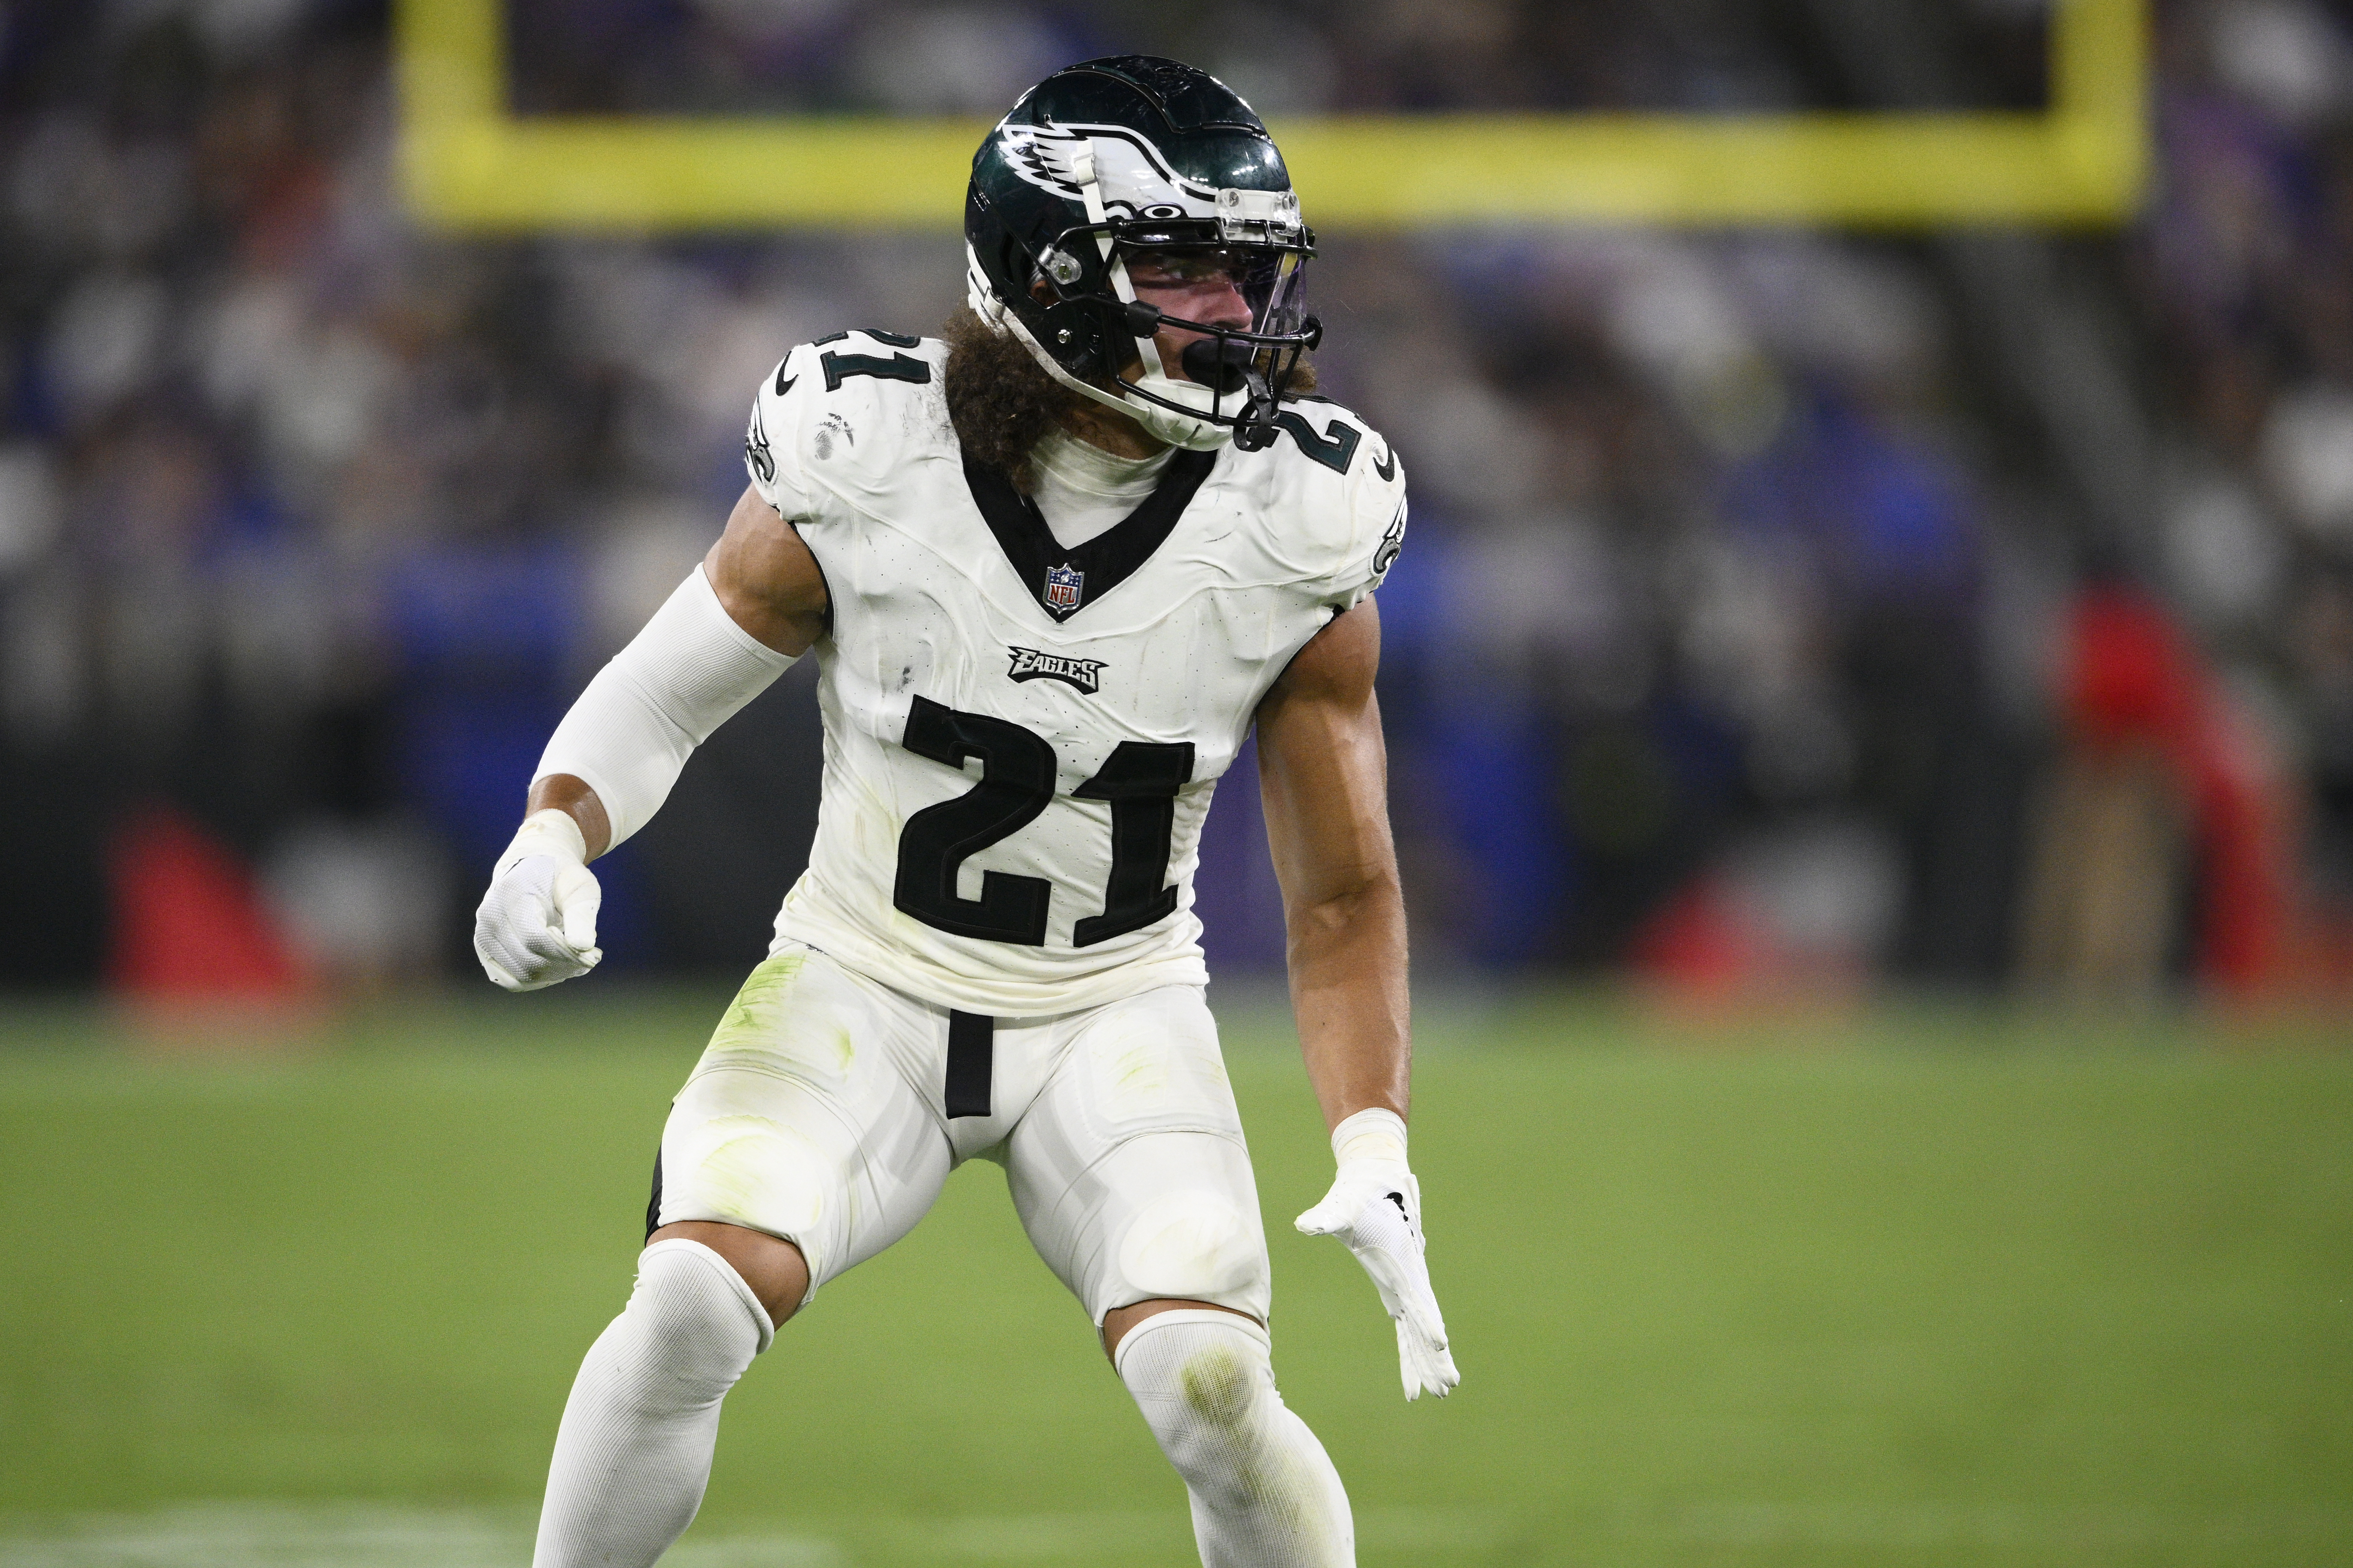 EAGLES SAFETY NUMBERS — REED BLANKENSHIP IS NO. 1!